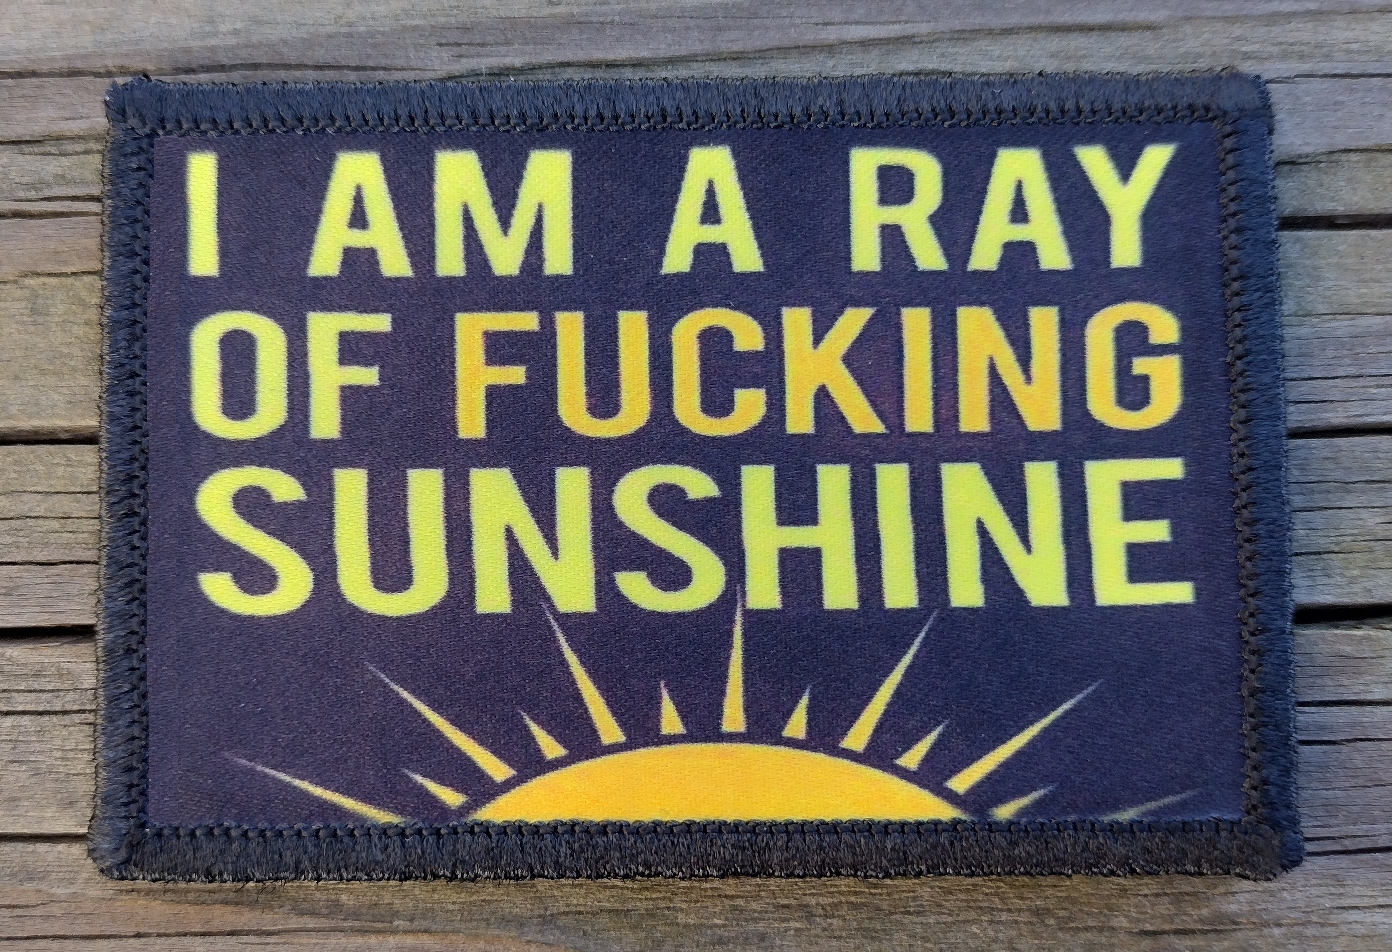 I Am A Ray Of Fucking Sunshine Morale Patch